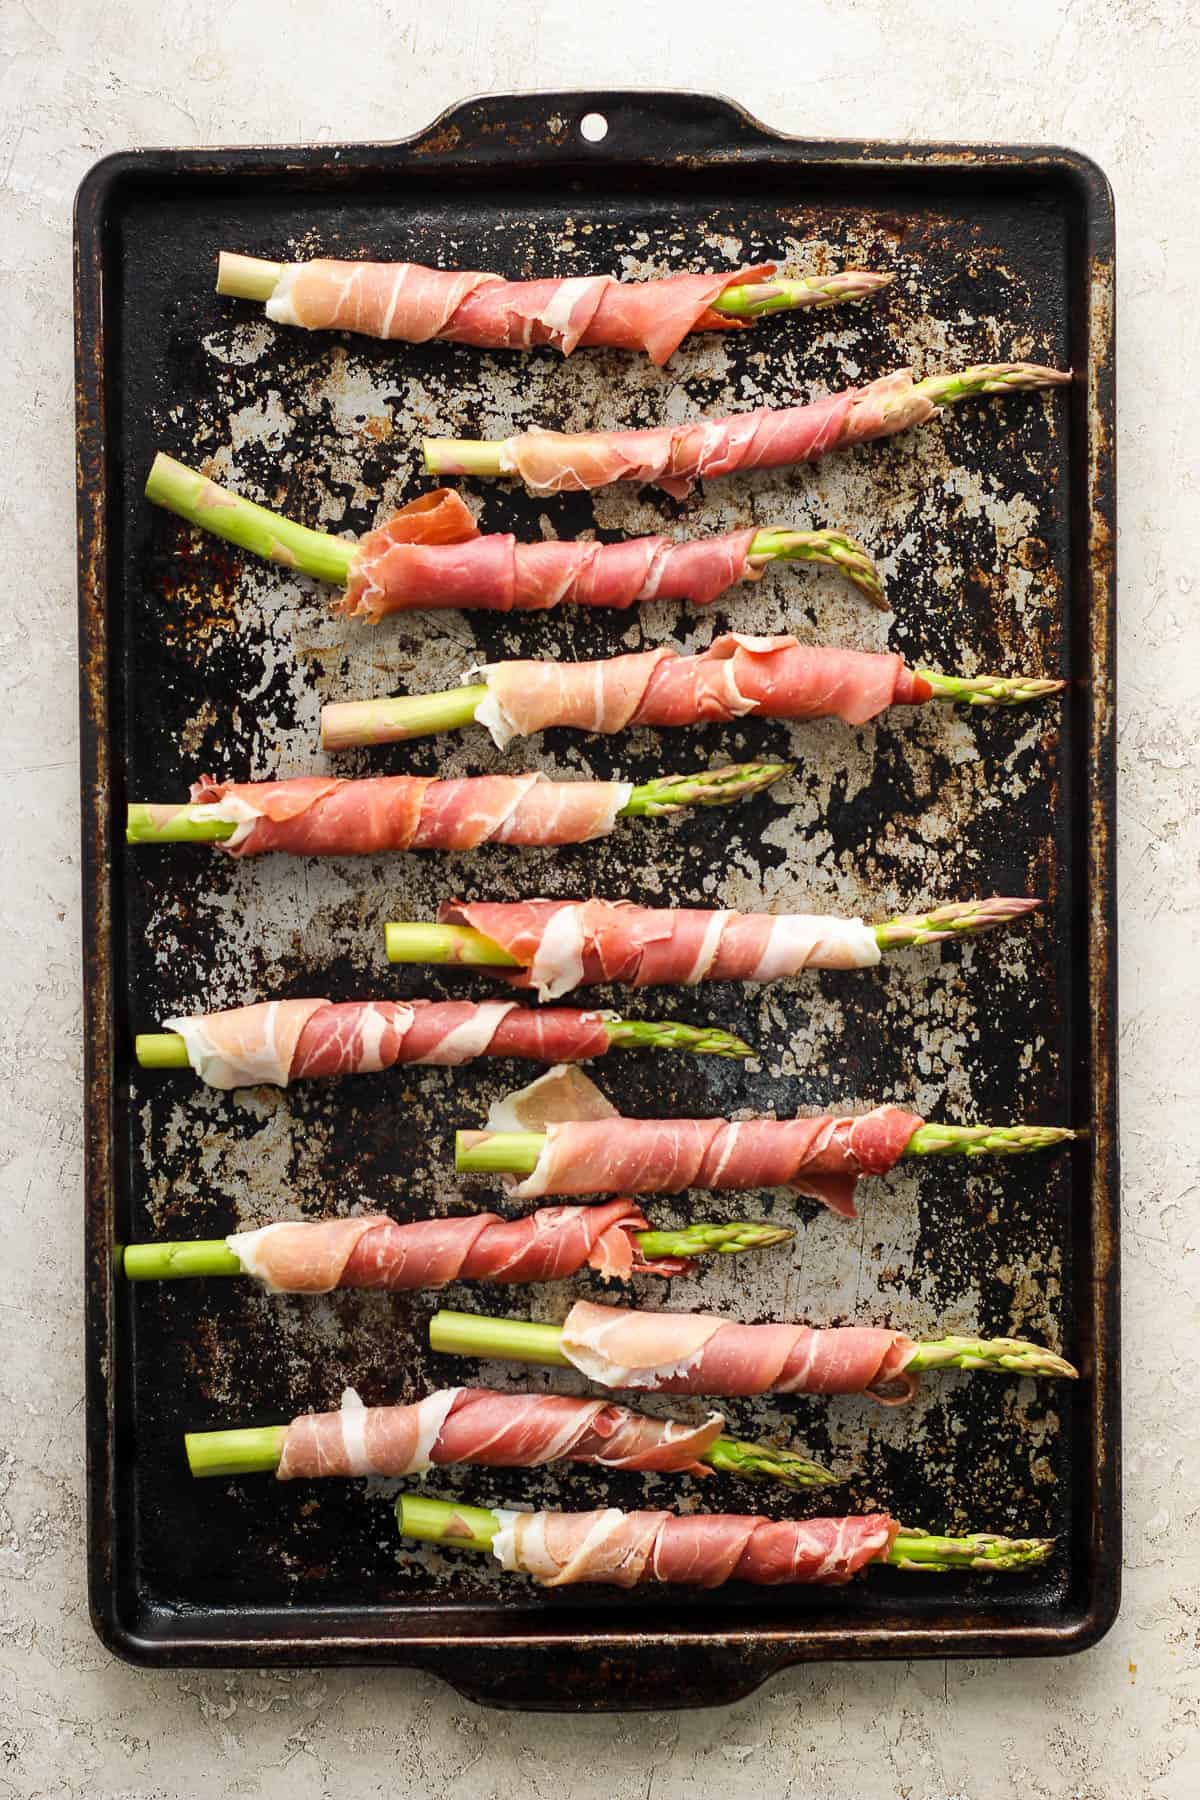 Several spears of prosciutto wrapped asparagus on a sheet pan before baking.